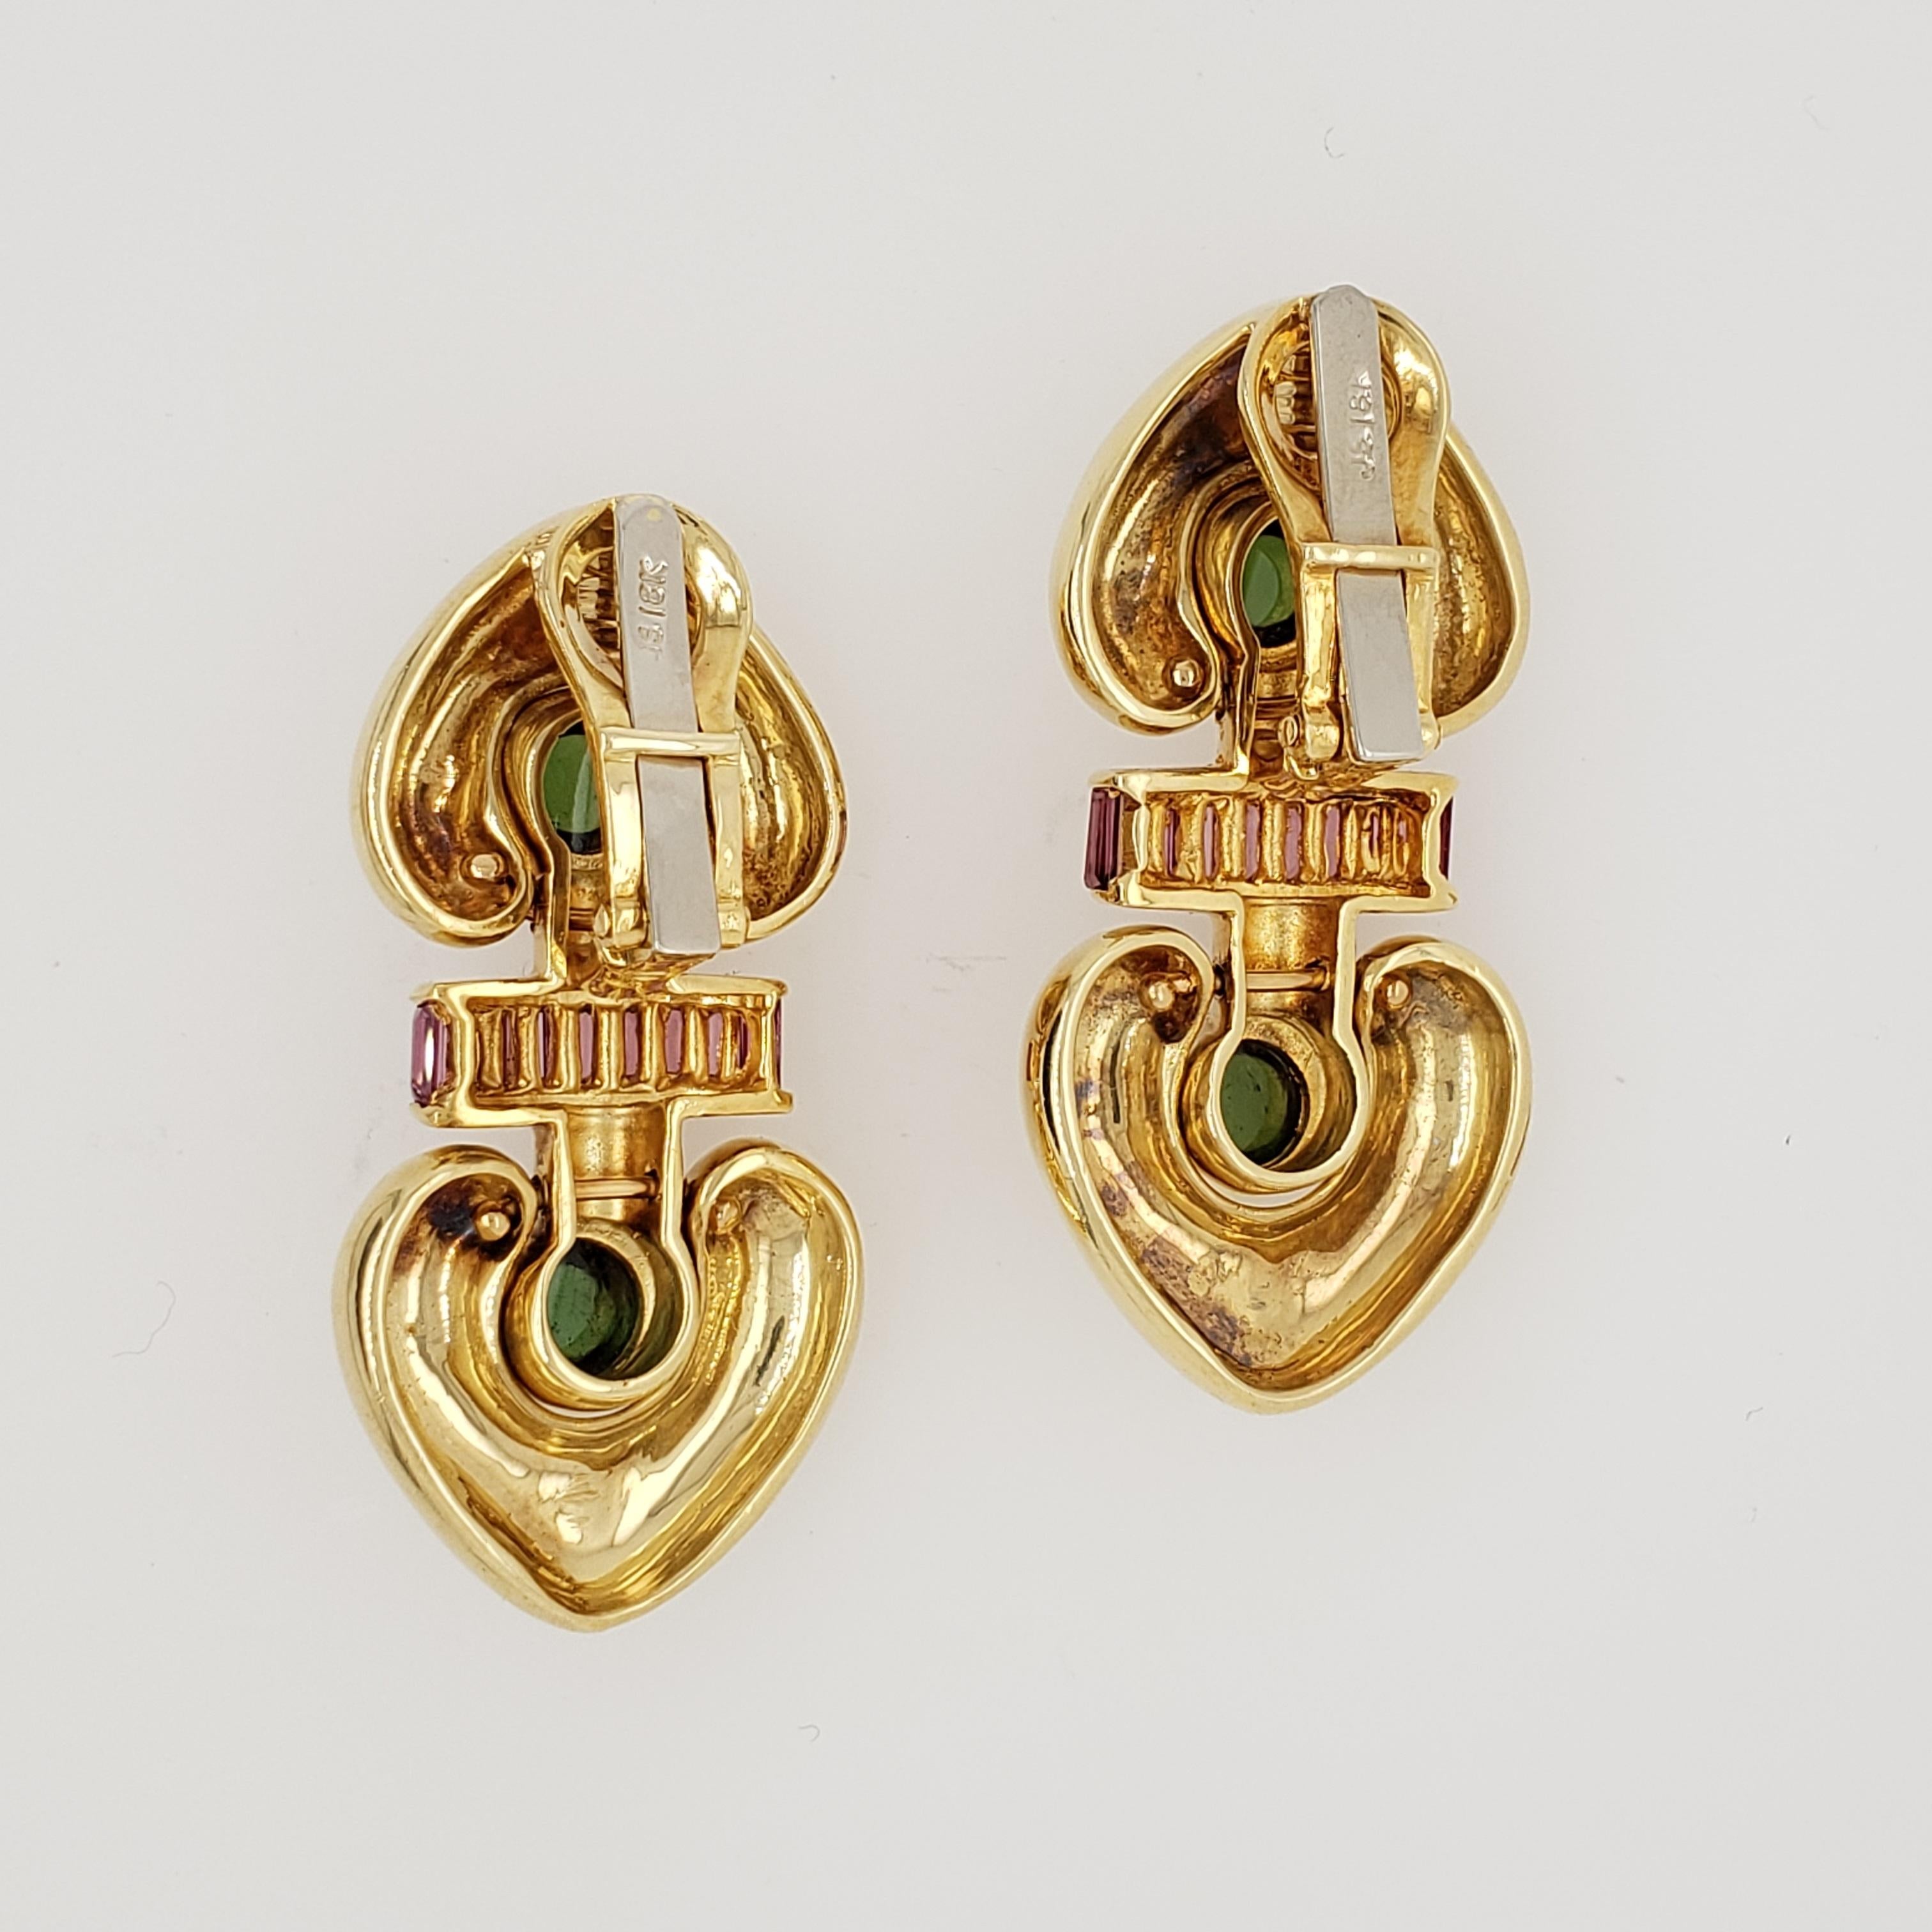 18kt yellow gold ear clips. Each set with 9 calibrated baguette pink tourmalines, 18 in total weighing aprx. 2.20 carats. There are 2 round cabochon green tourmalines, 4 in total weighing aprx. 1.50 carats. The earrings weigh 39 grams in total. Made